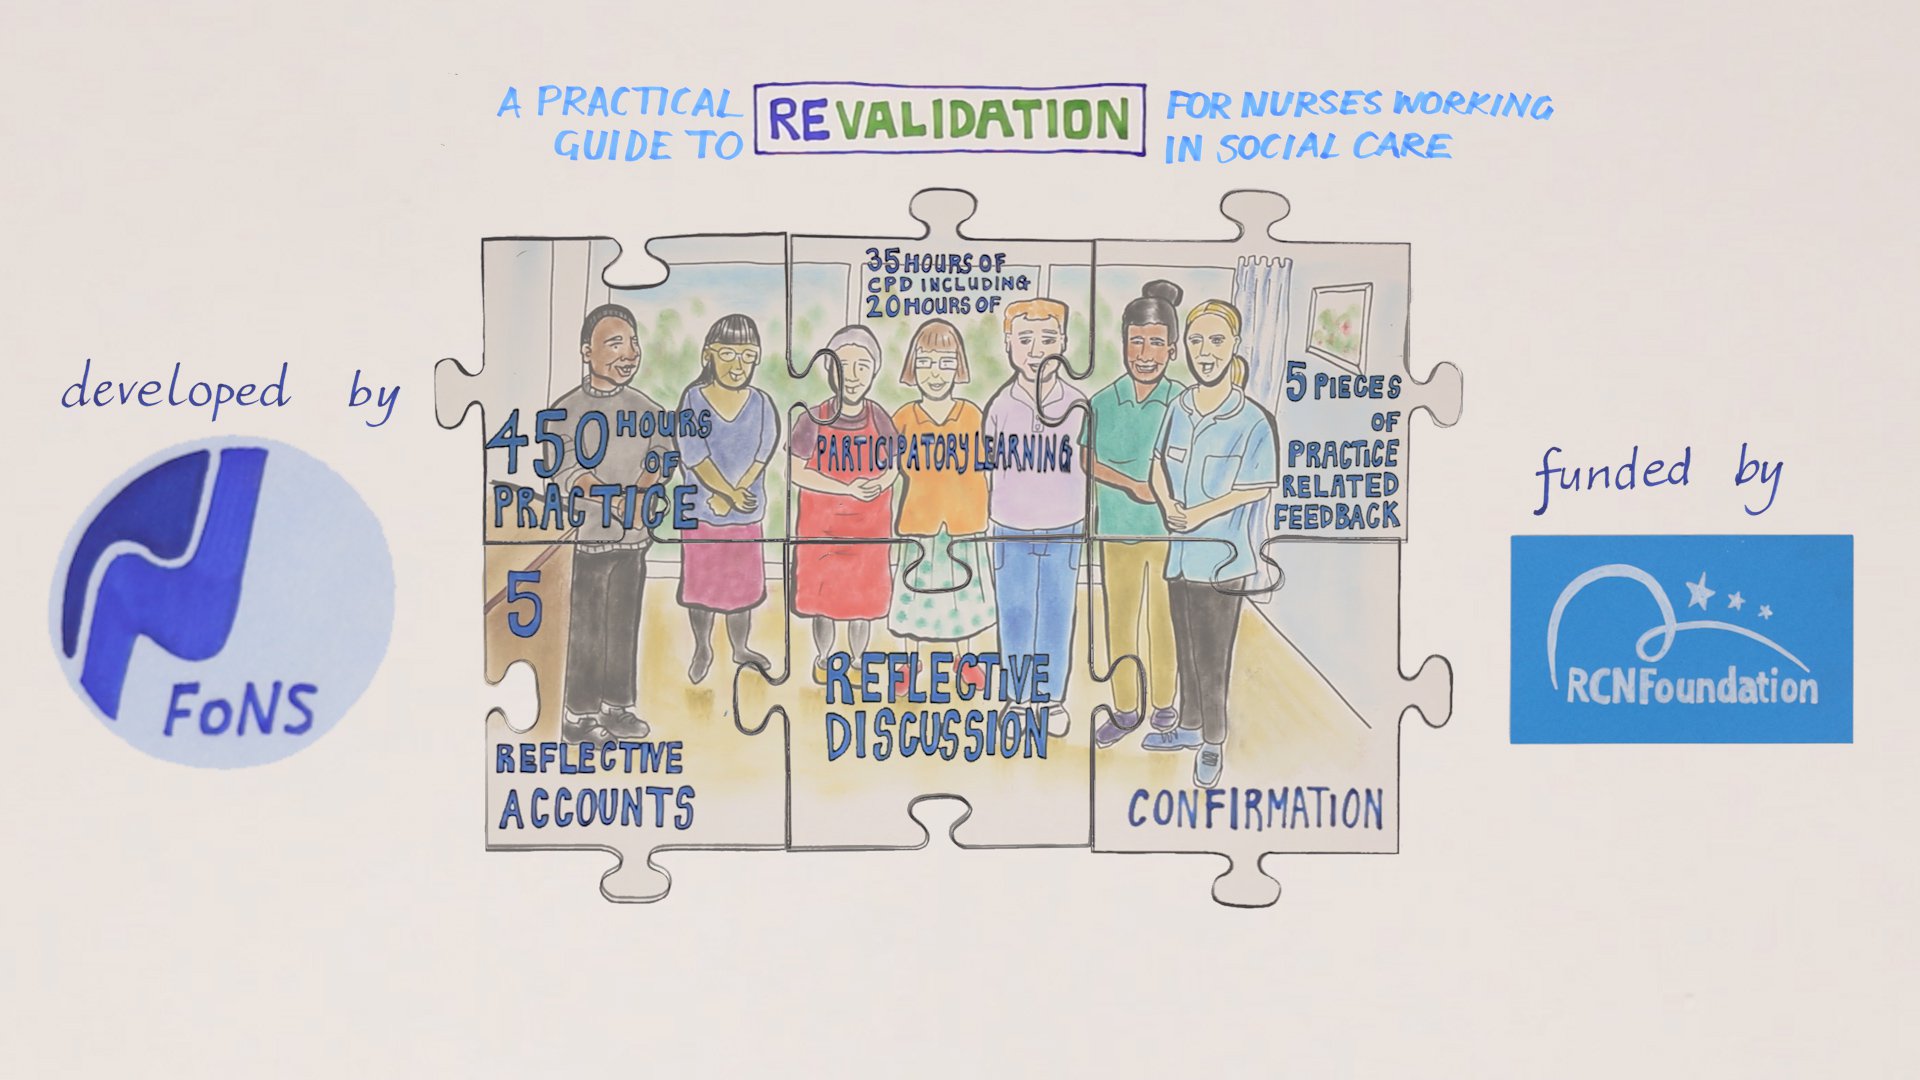 A Practical Guide to Revalidation for Nurses Working in Social Care featured image